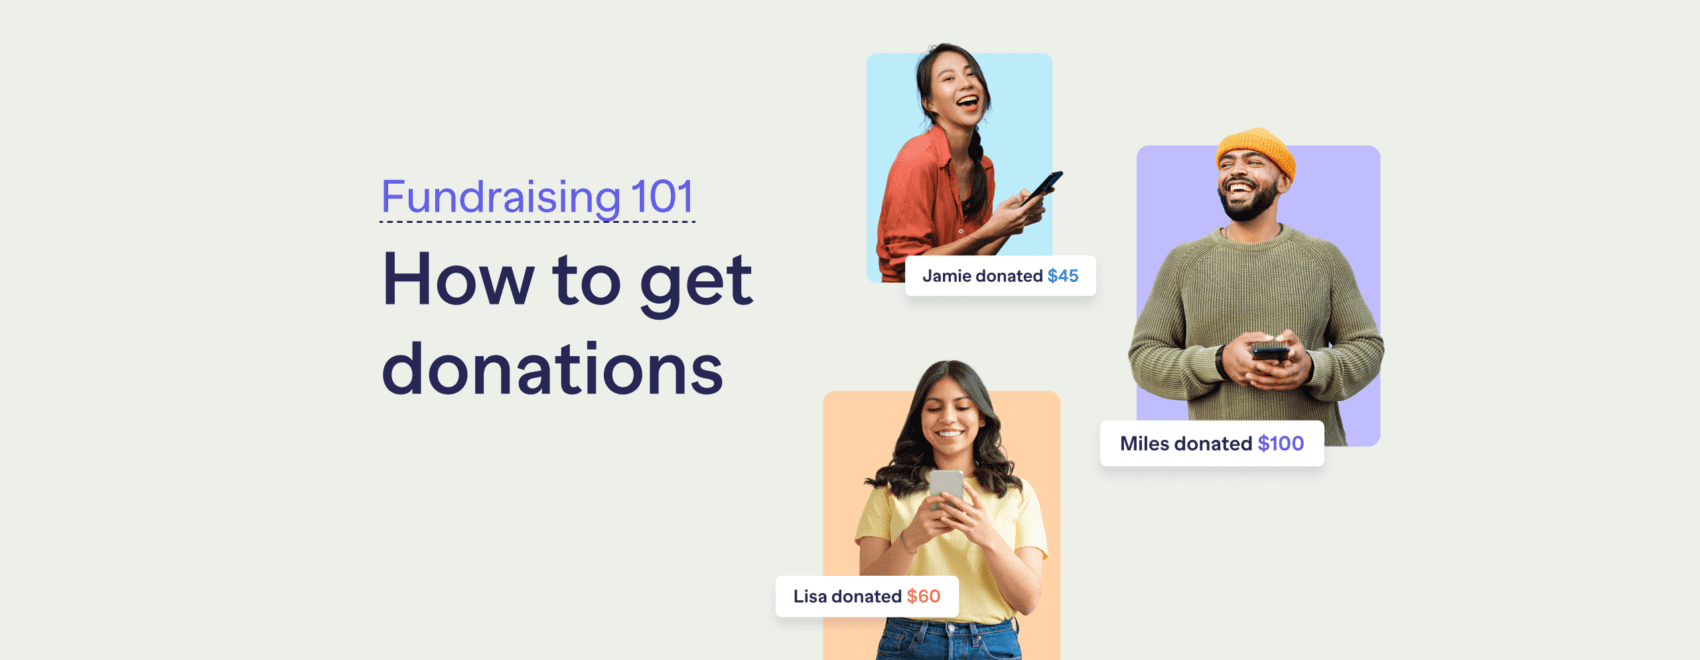 Fundraising 101 How to get donations